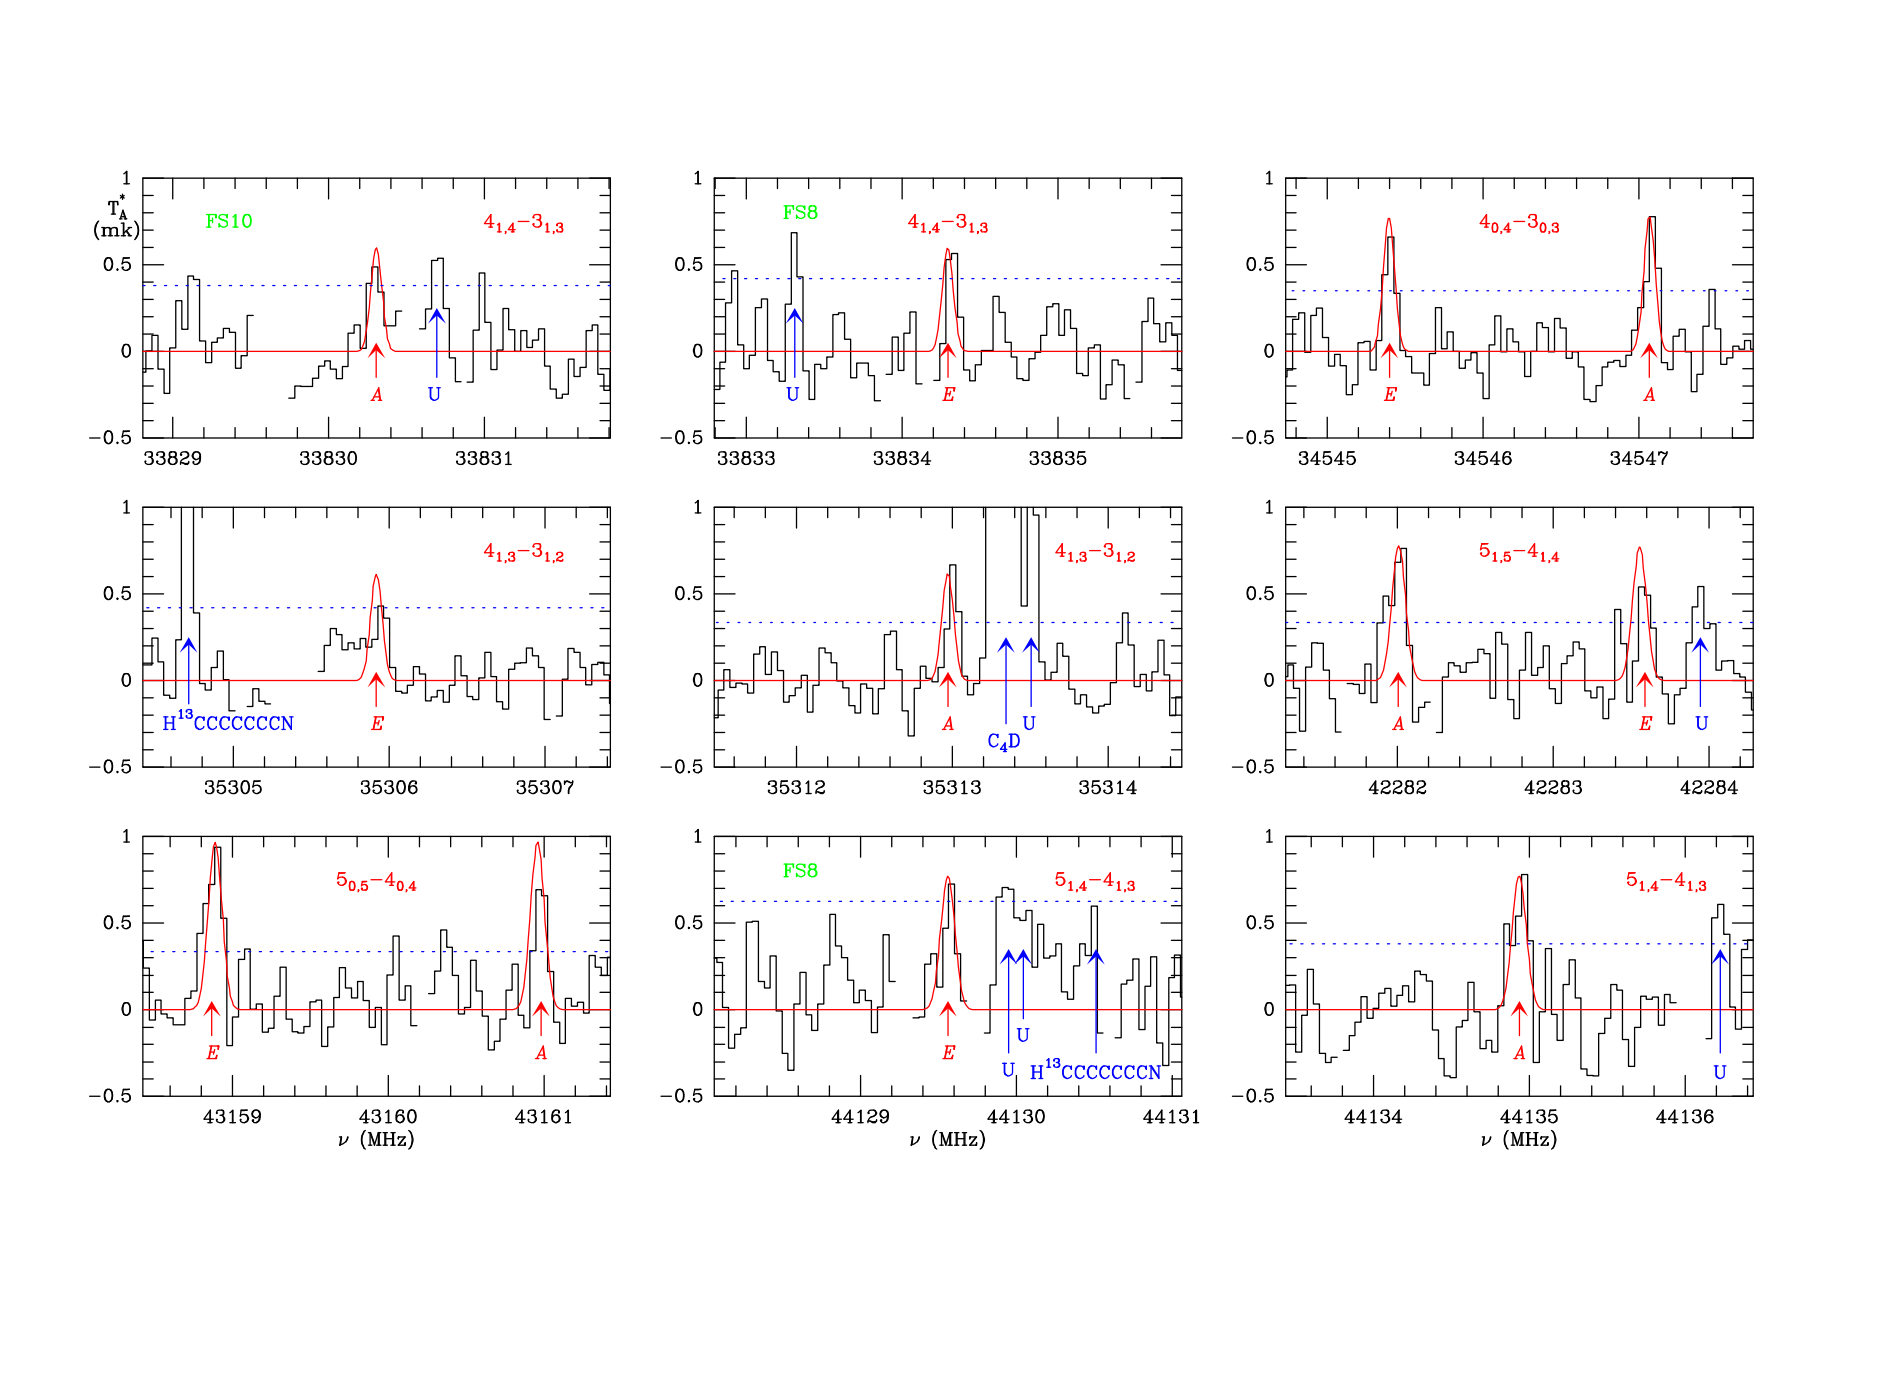 Discovery Of CH3CHCO In Taurus Molecular Cloud (TMC-1) With The QUIJOTE Line Survey